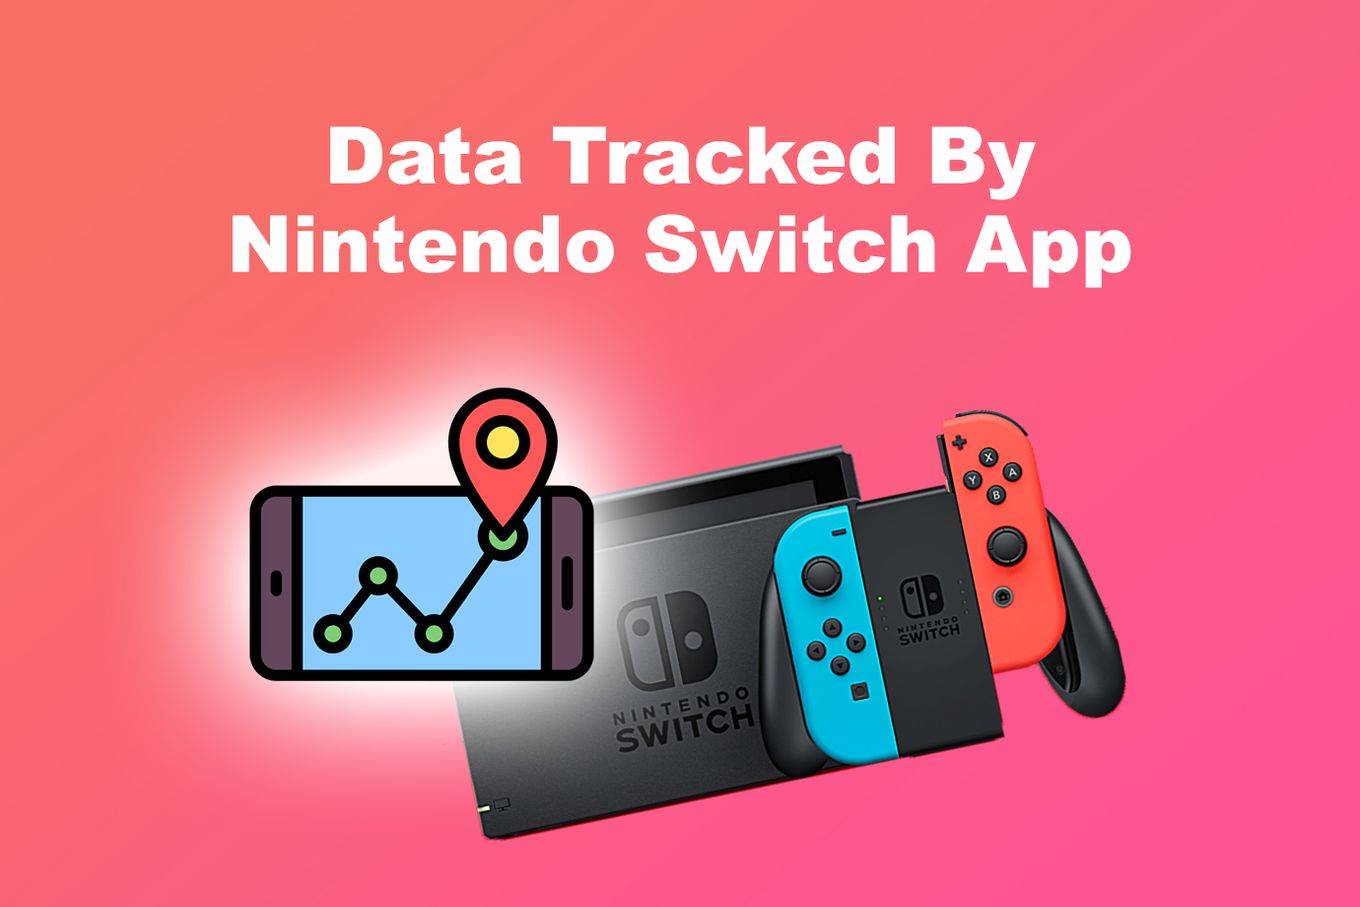  Data tracked by Nintendo Switch App